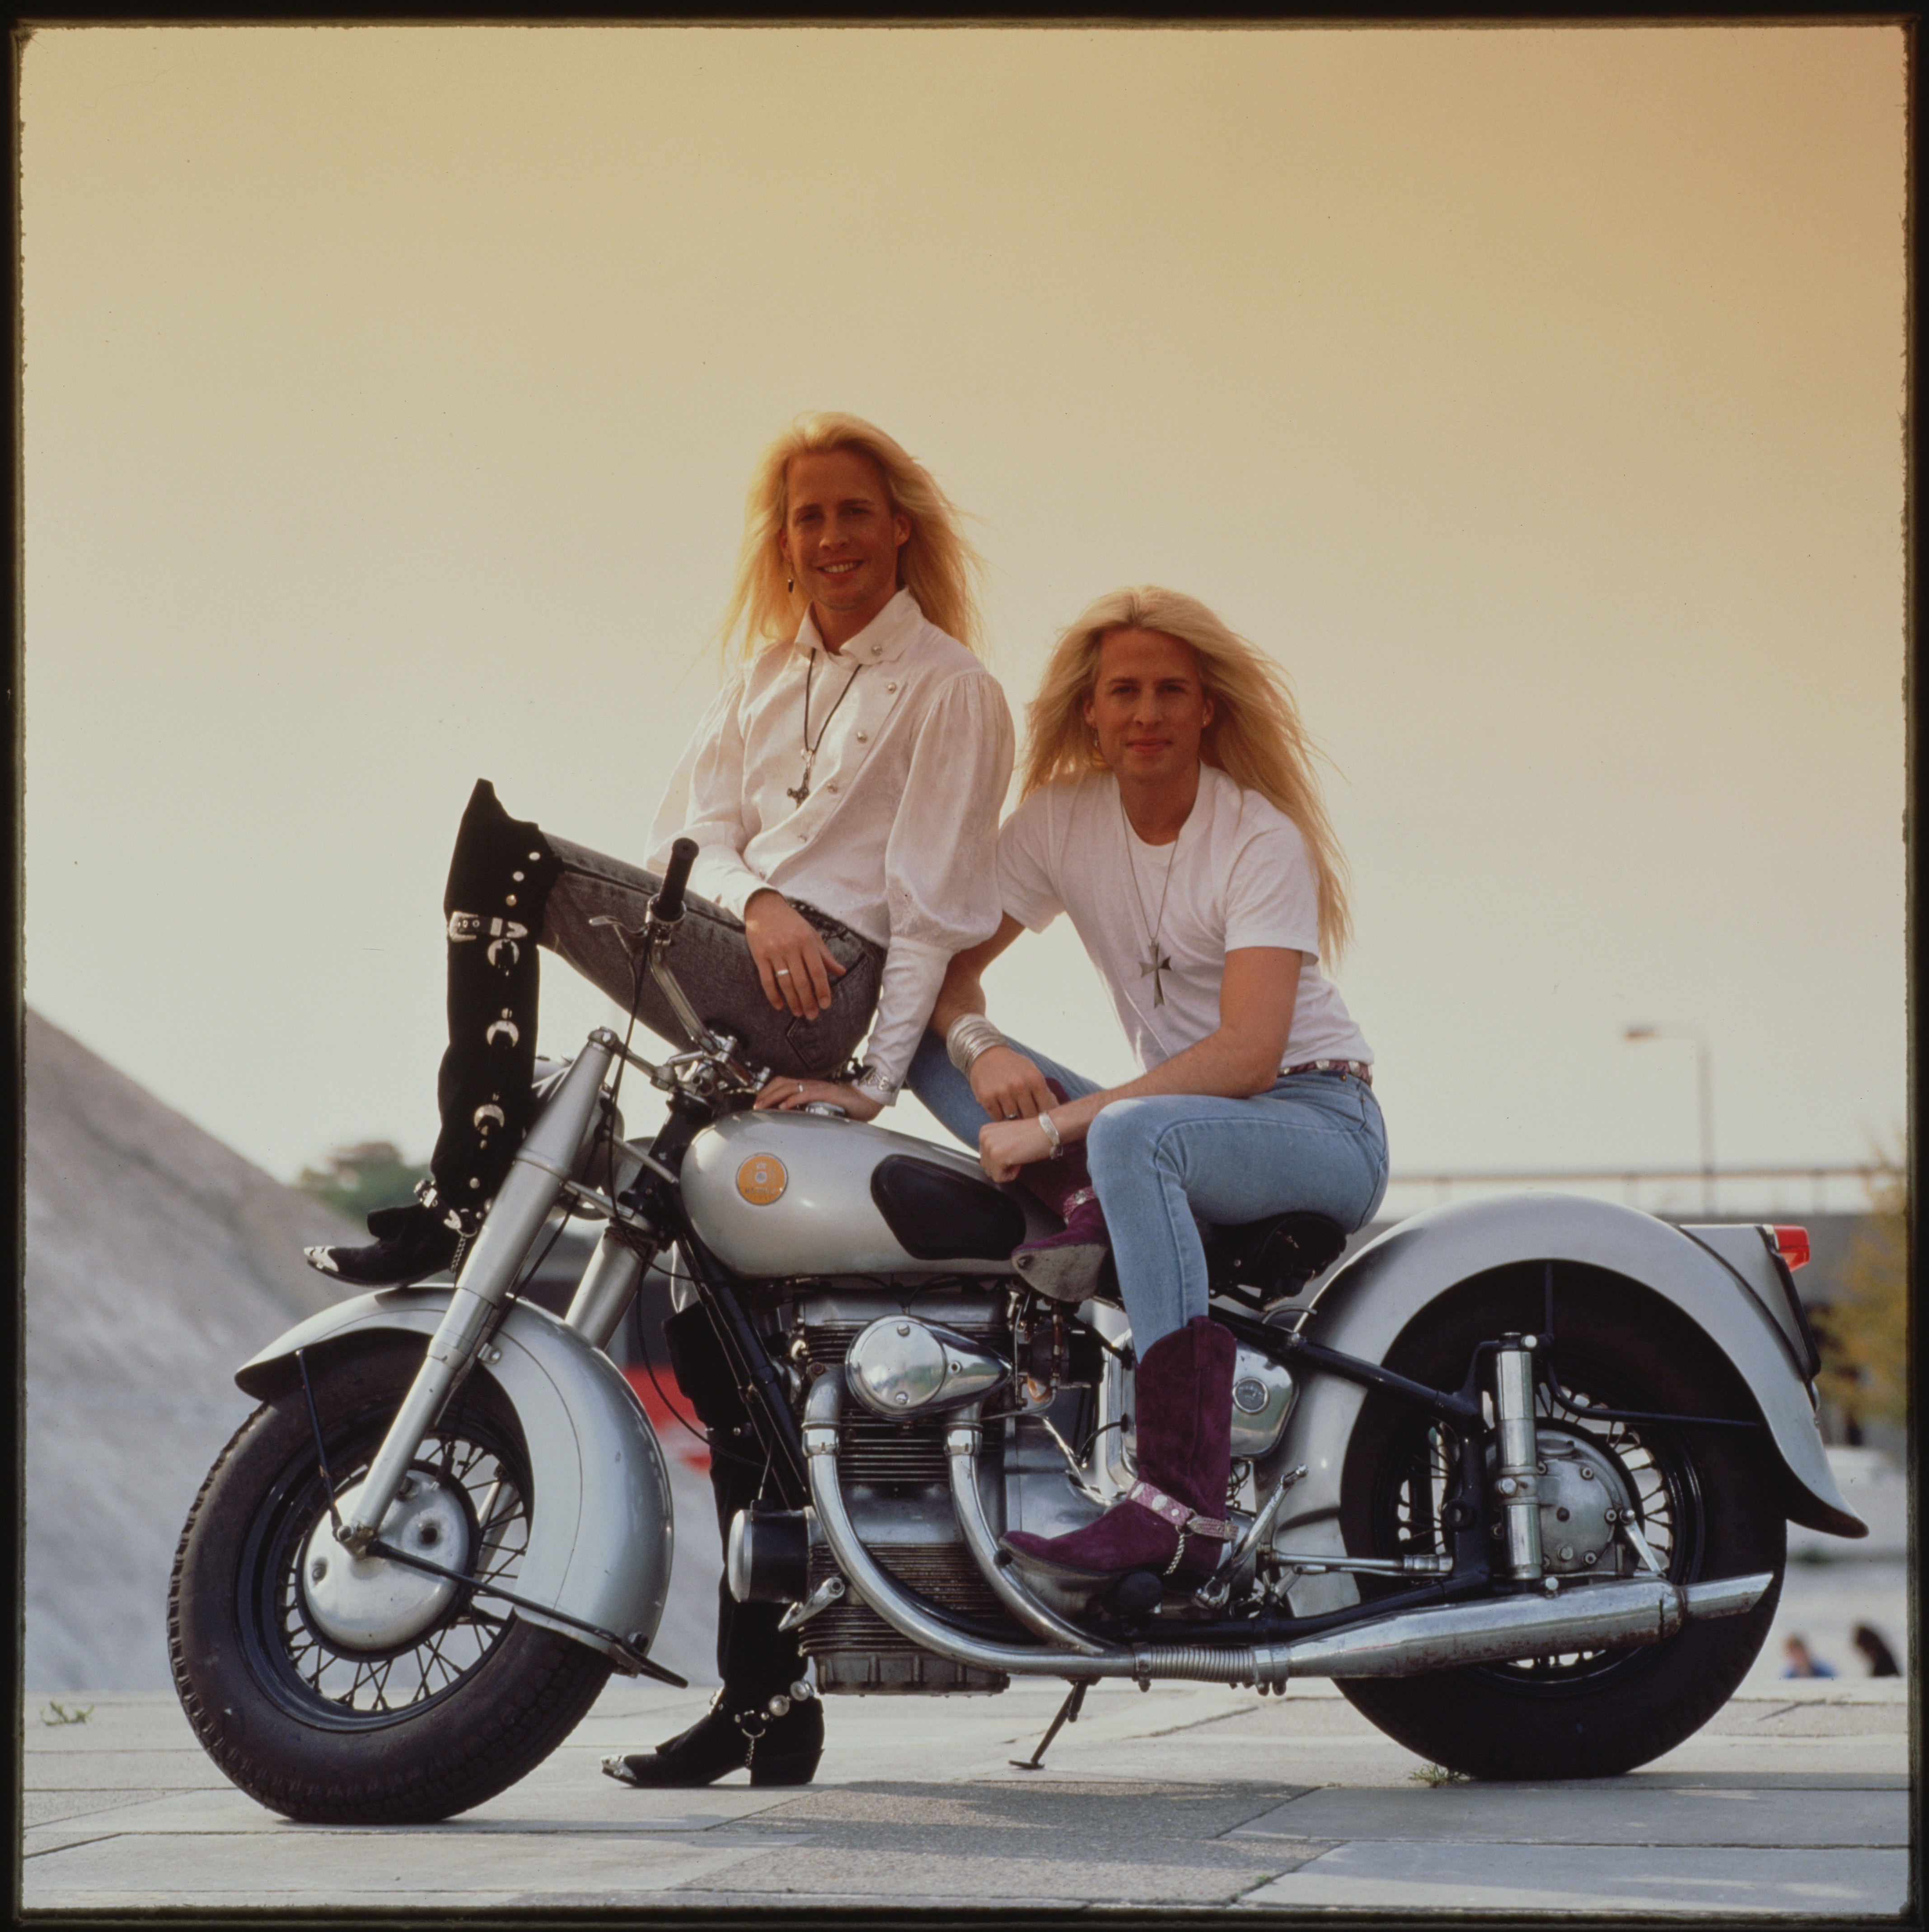 Matthew Nelson and Gunnar Nelson pose on a motorbike on January 1, 1990 in London | Source: Getty Images